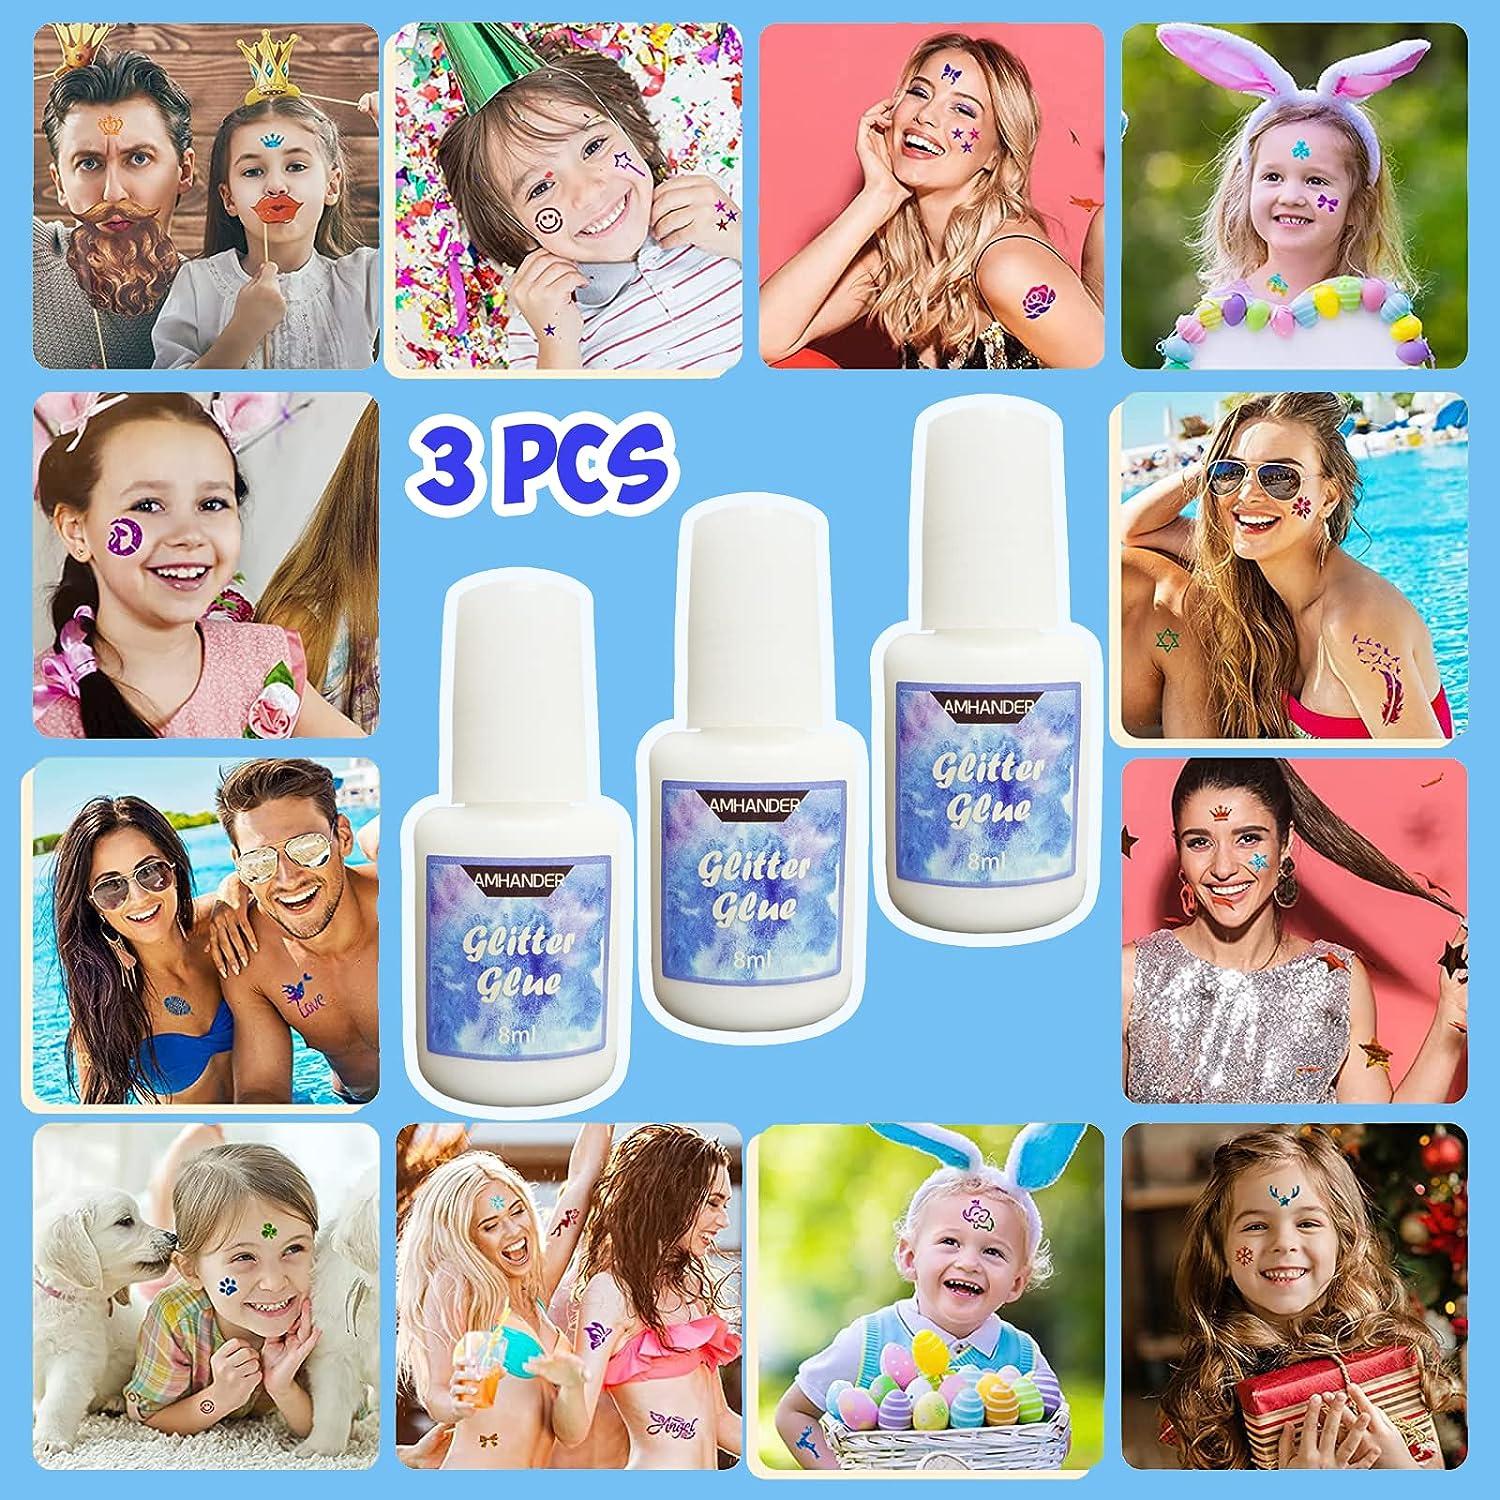 Temporary Tattoo Glue - Yomagine 8ml Glitter Glue Brush Bottle Water  Soluble Body Painting Glue Ideal for Halloween Carnival Birthday Party  Theme Party Costume Events & Makeup Artists (3 Pcs)